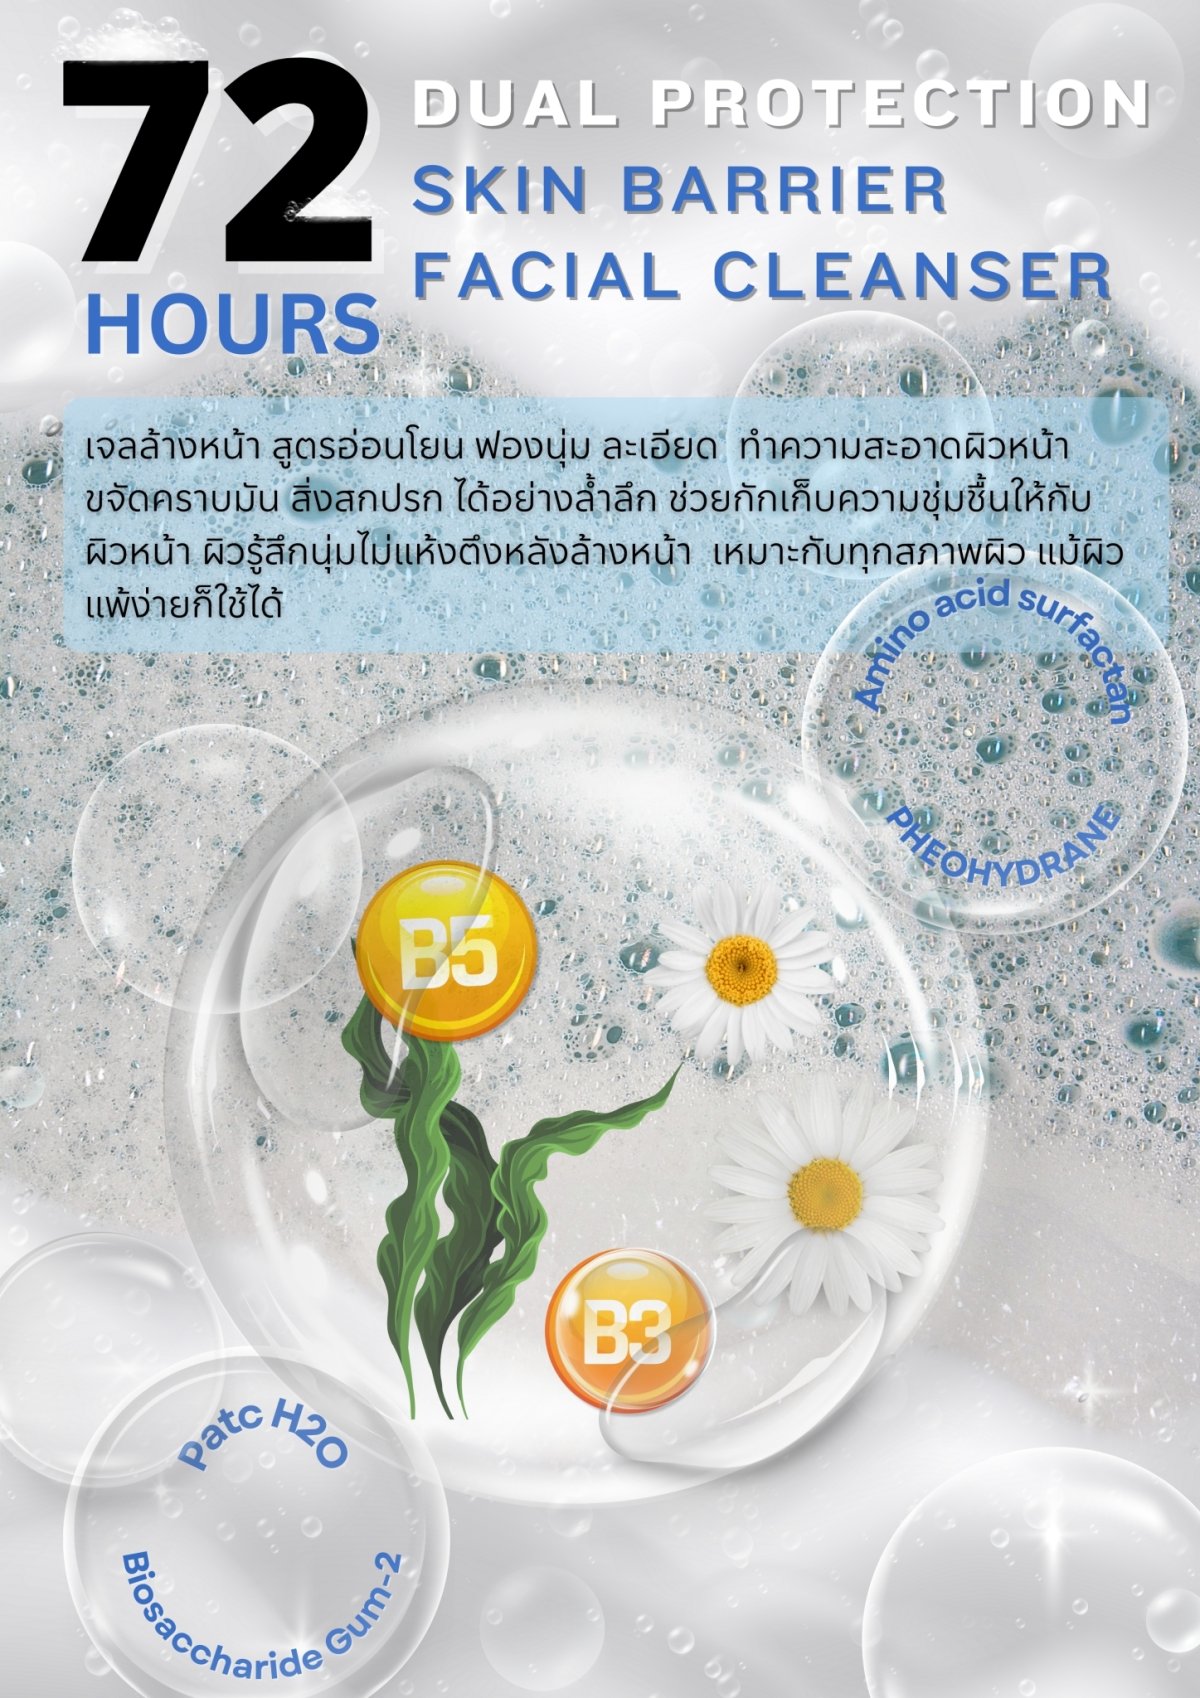 Dual protection skin barrier Facial Cleanser - aecbkk